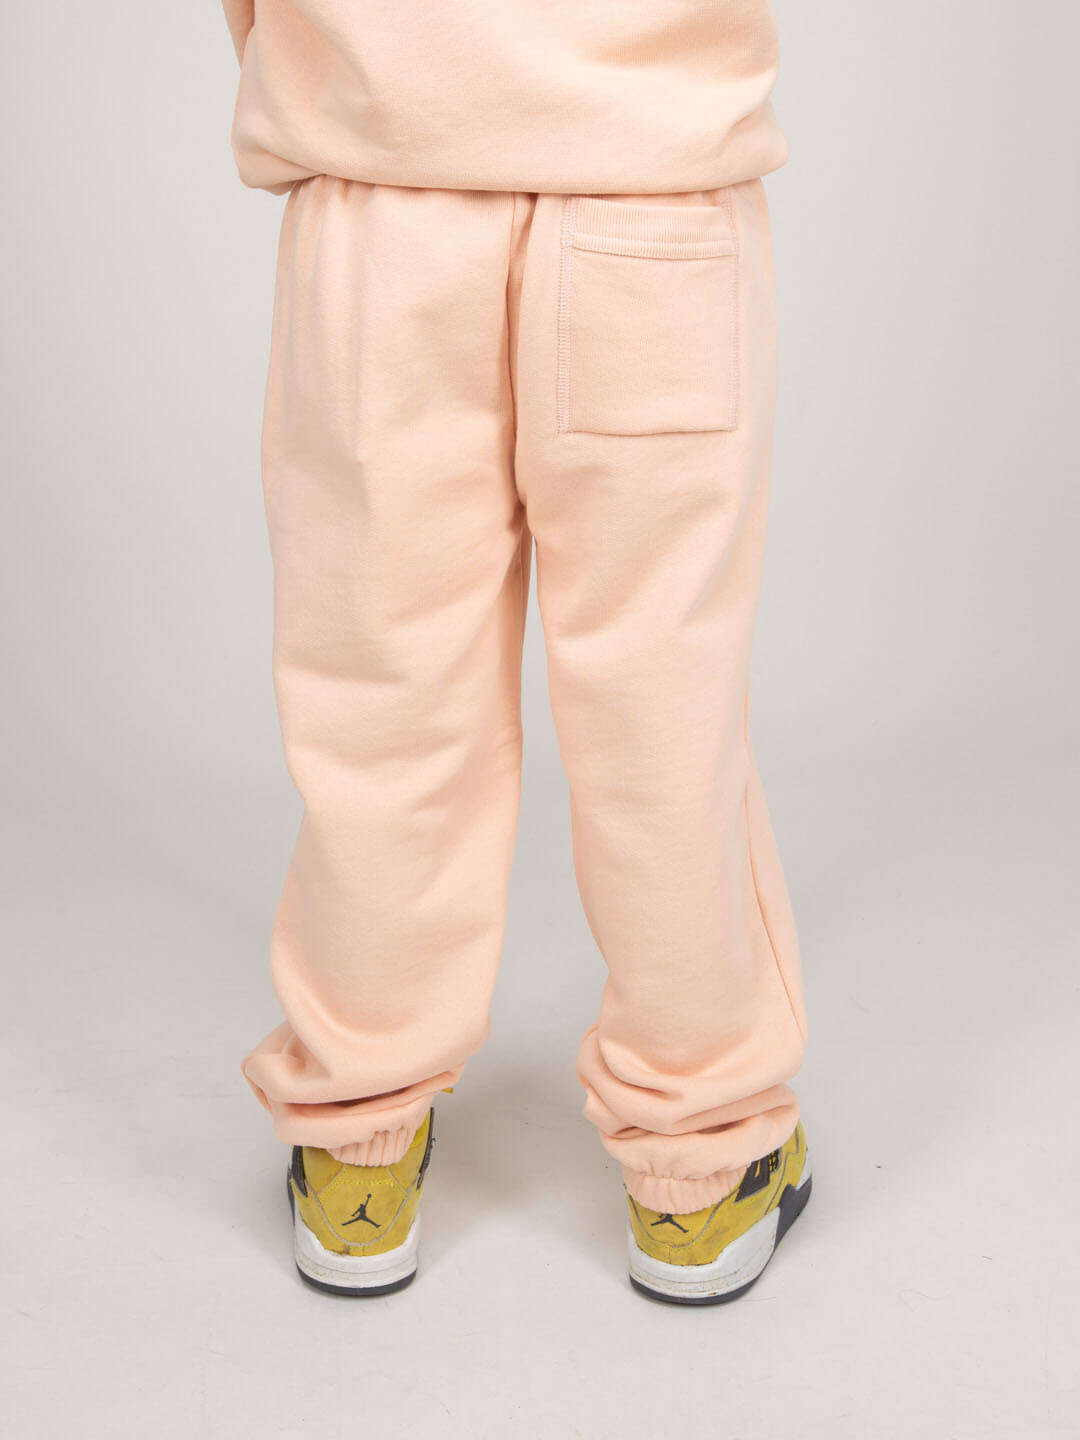 Champion Women Sweatpants with drawstrings and 2 pockets pink